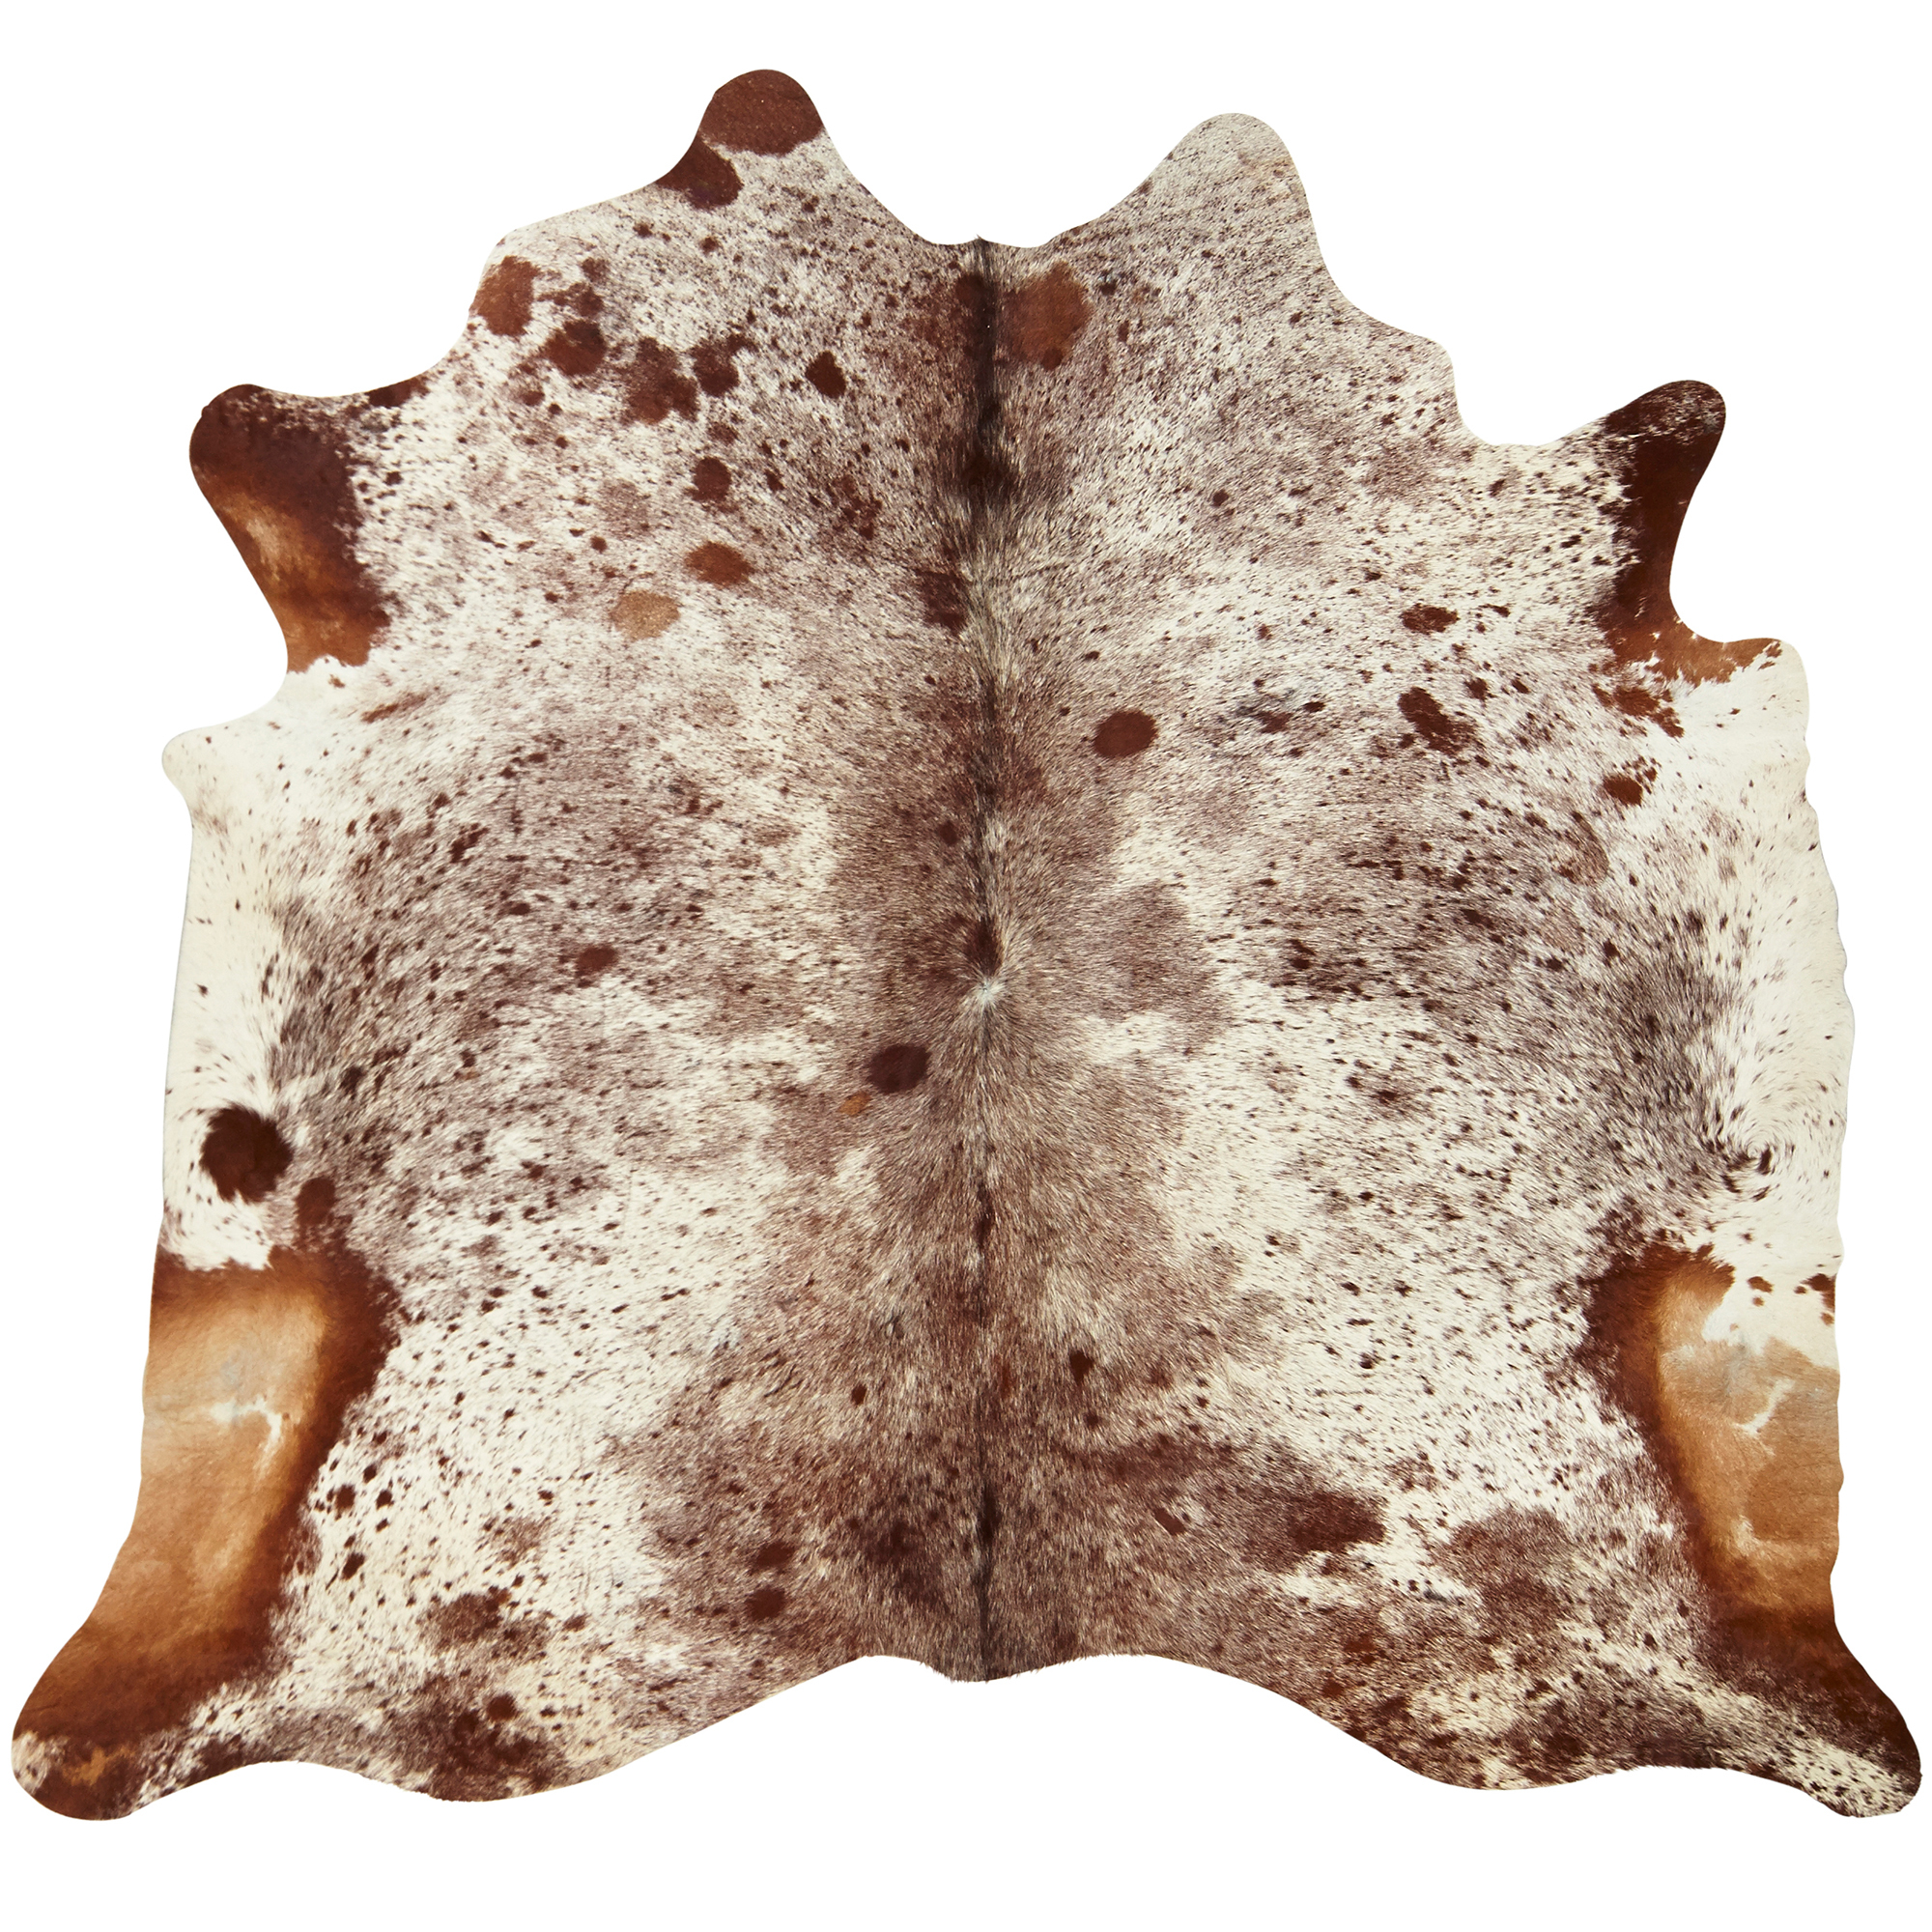 Nswleather Spotted Brown Longhorn Cow Hide Rug Reviews Temple